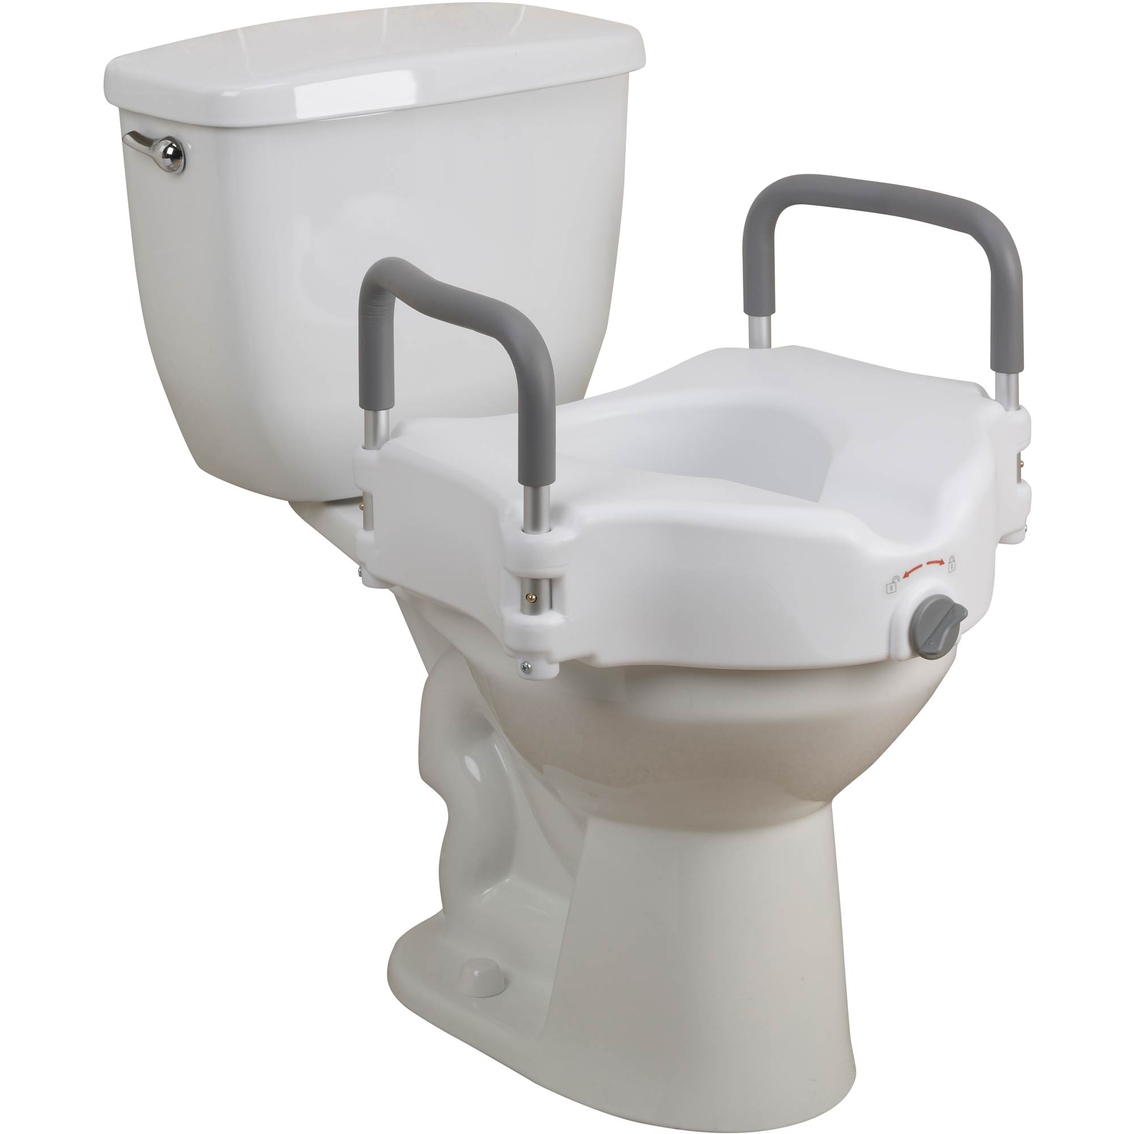 Drive Medical Elevated Raised Toilet Seat with Removable Padded Arms, Standard Seat - Image 2 of 2